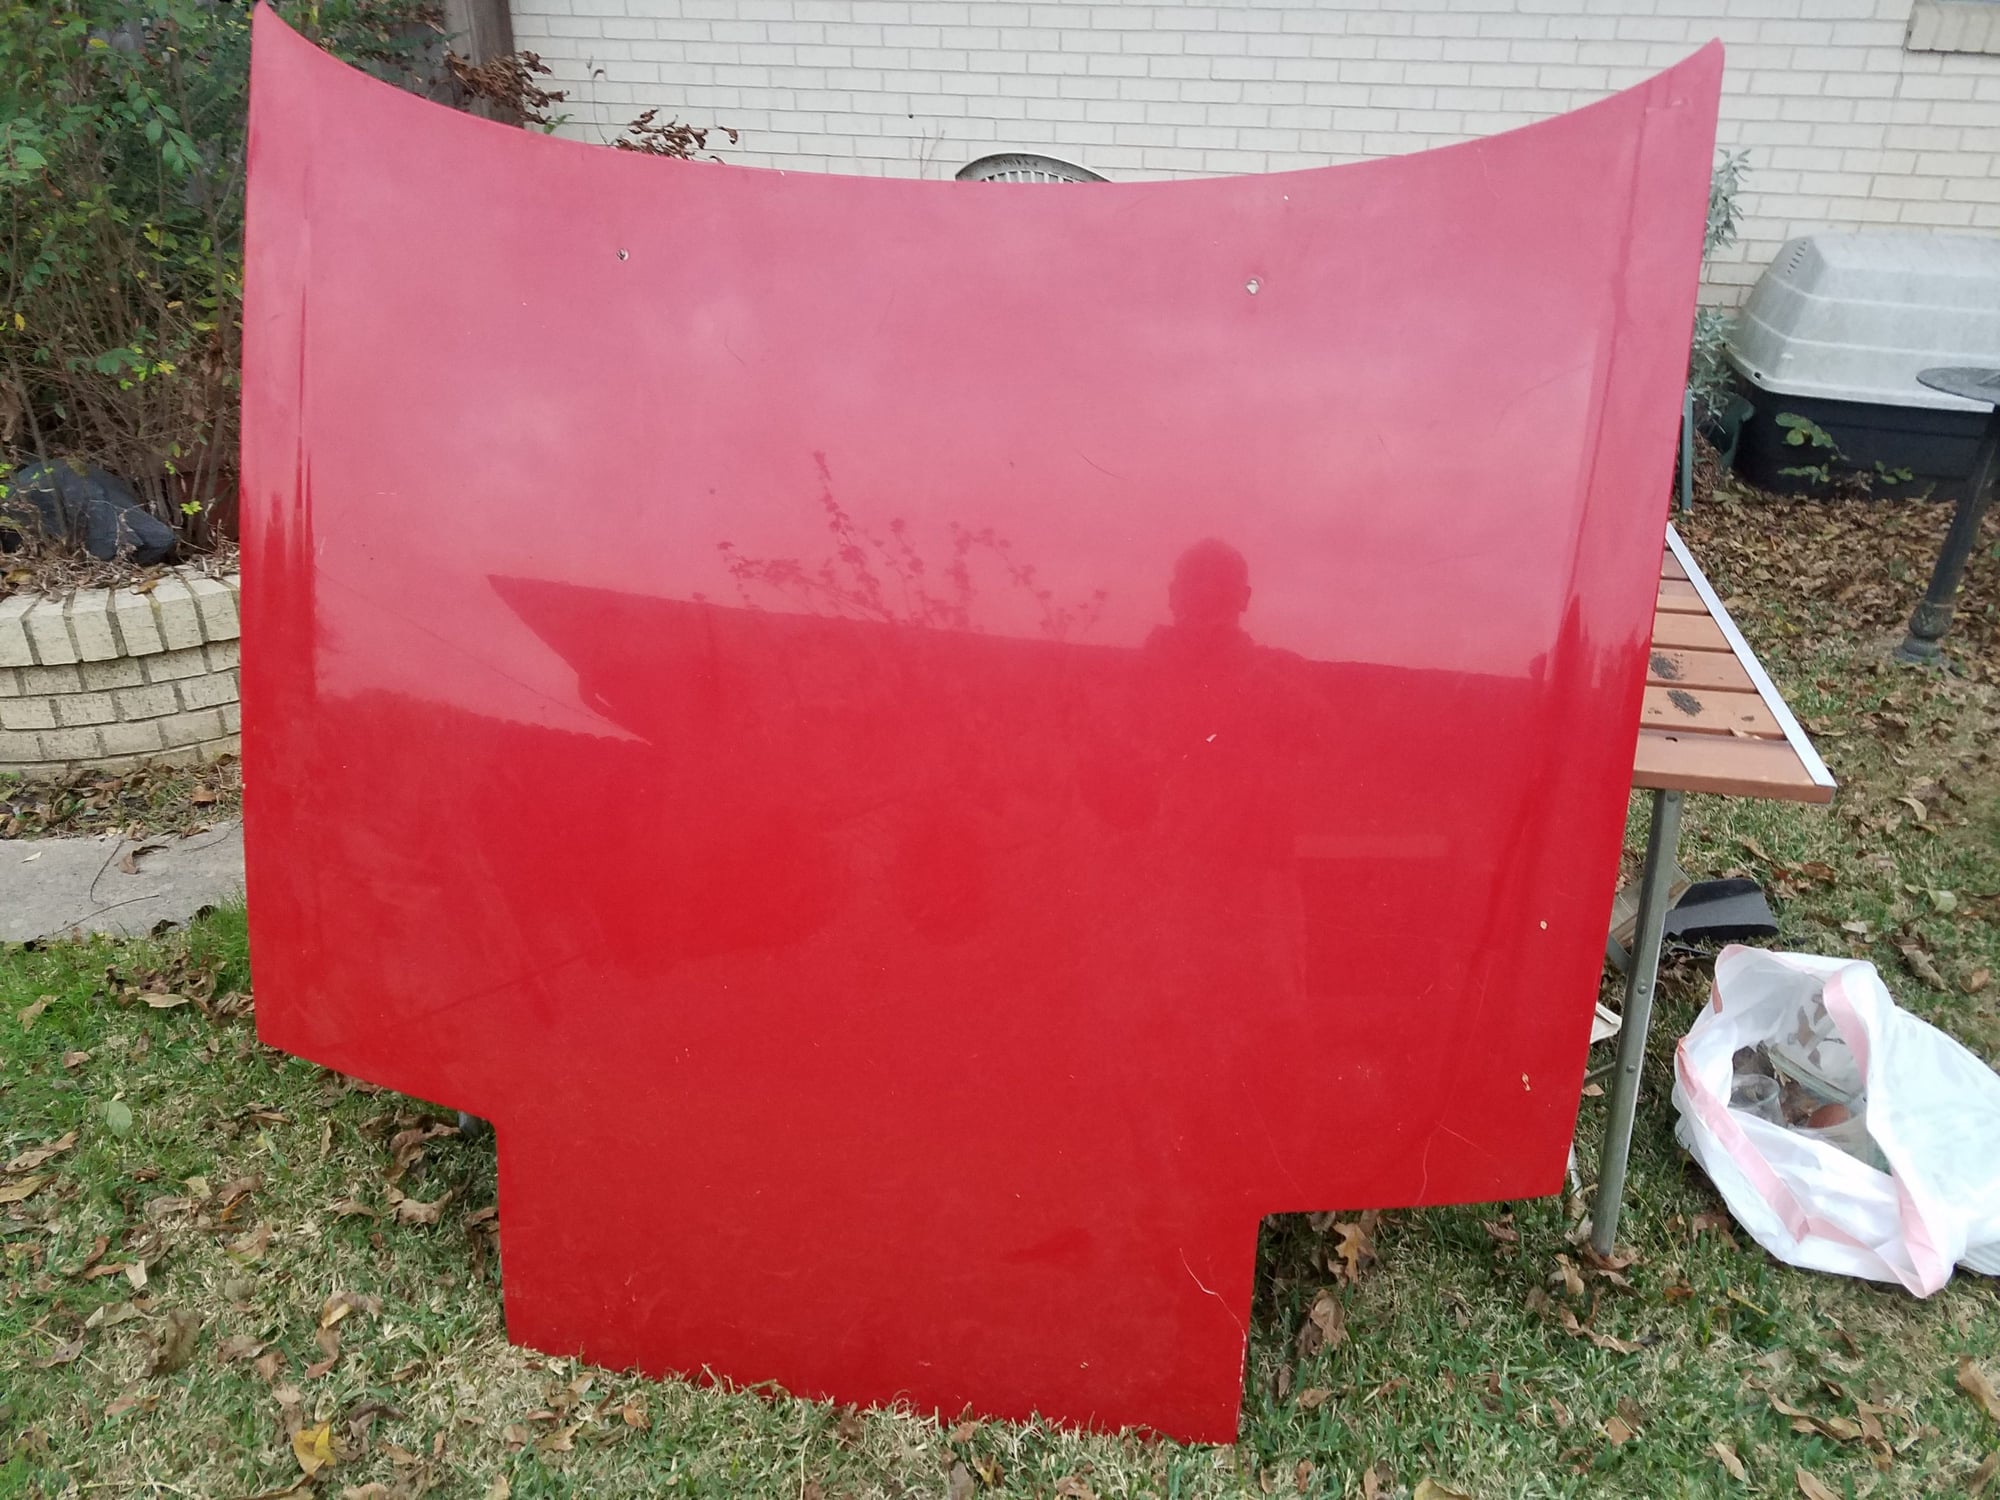 Exterior Body Parts - Aluminum hood from convertible - Used - 1986 to 1990 Mazda RX-7 - Ft. Worth, TX 76177, United States